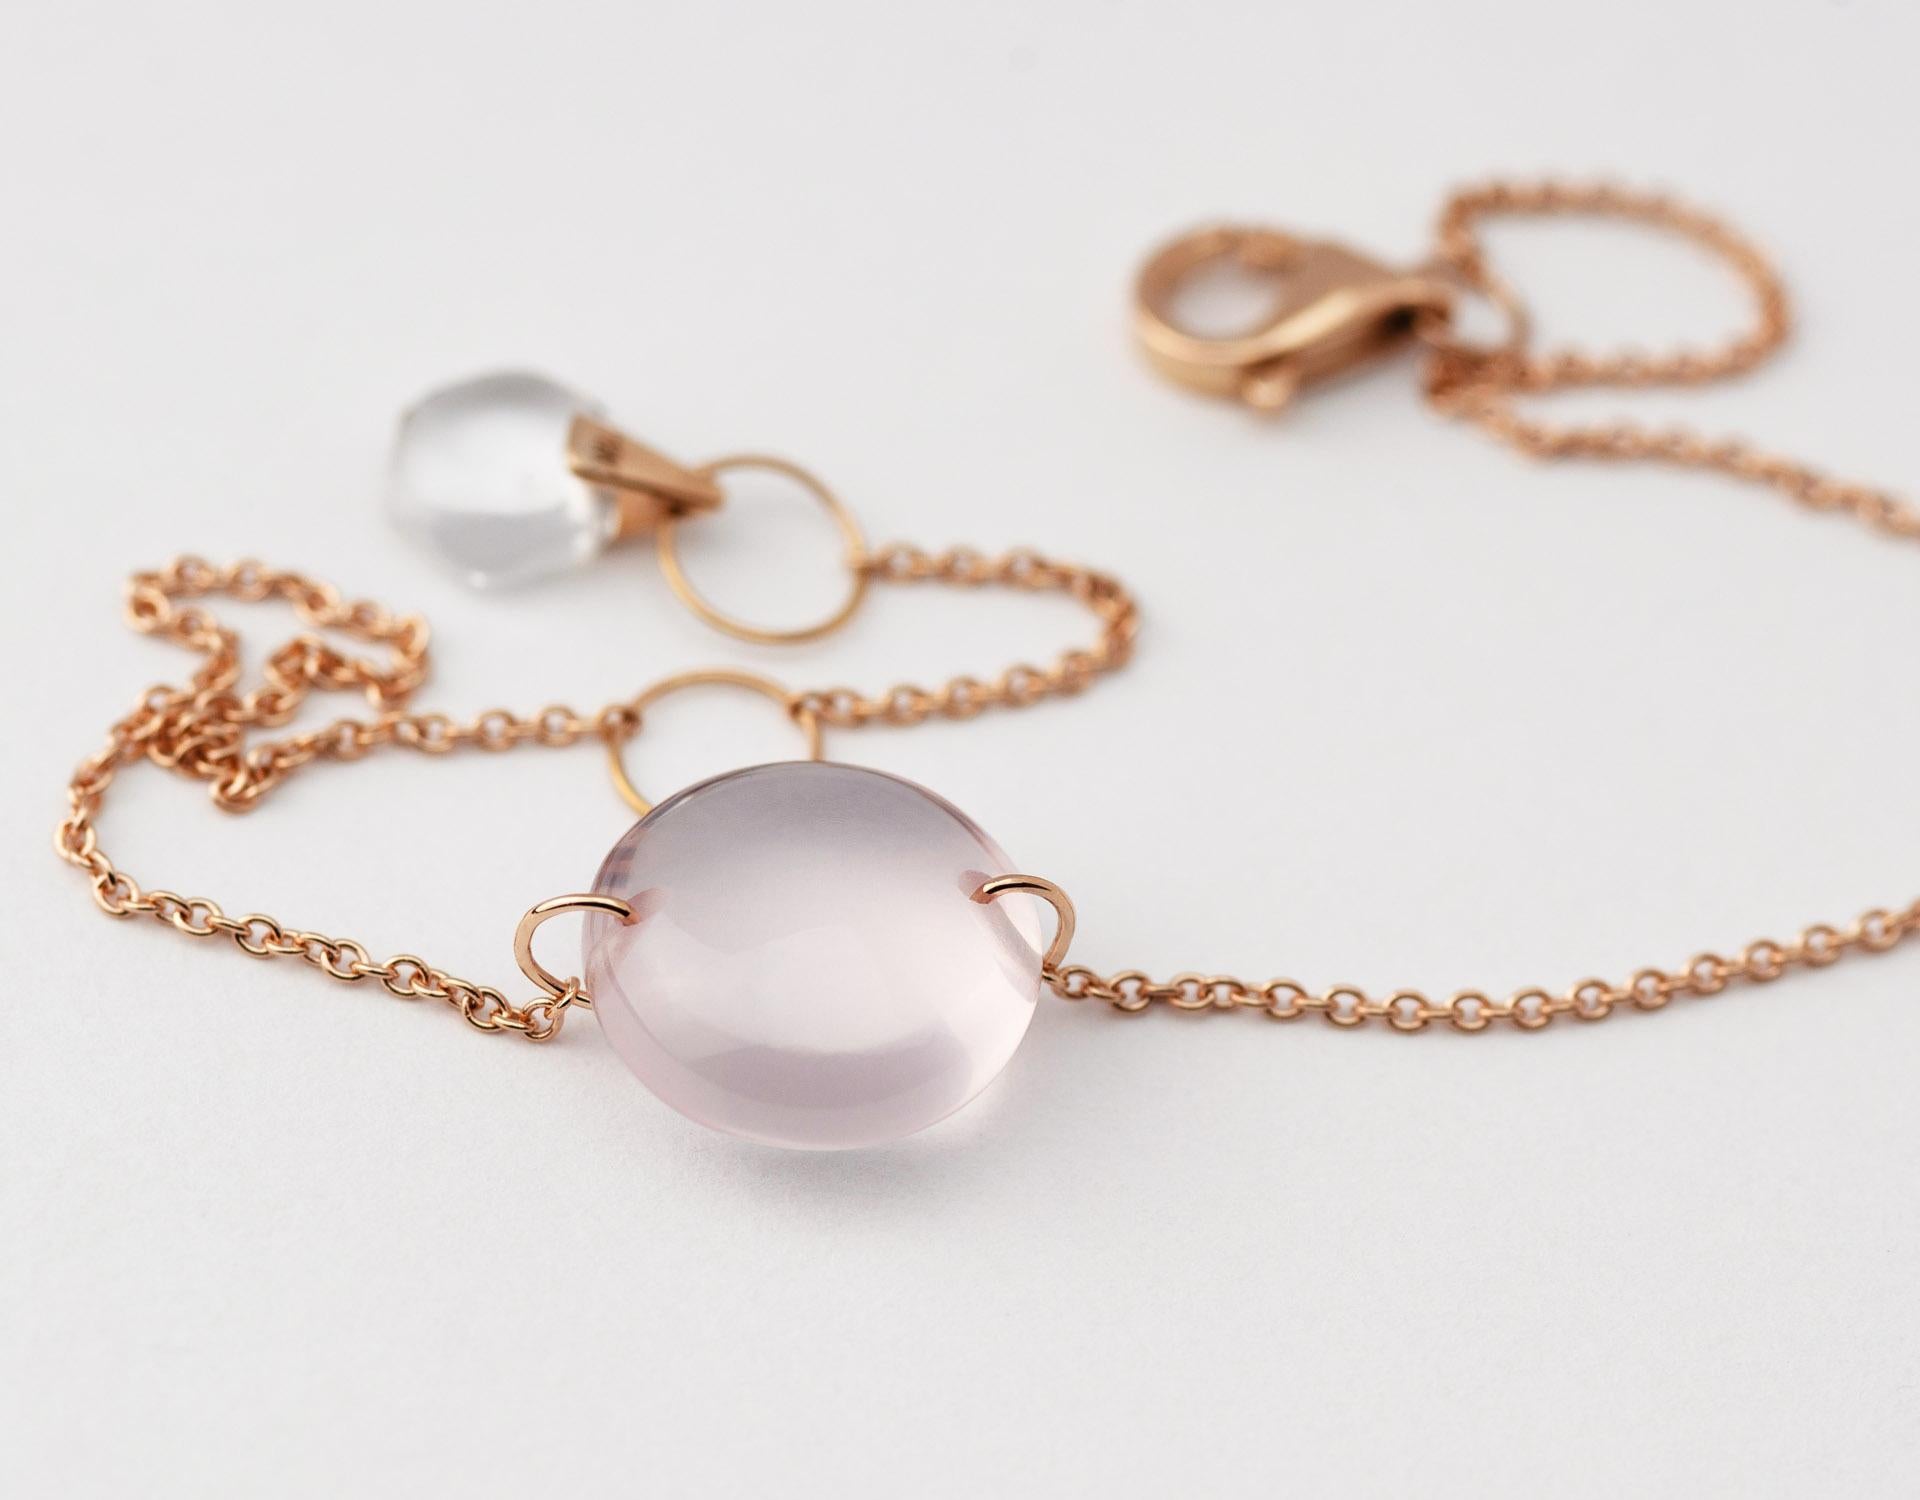 Rebecca Li designs Mindfulness. 

This minimum contemporary bracelet is from her Crystal Links Collection. Inspired by sacred geometry, it's designed to let us remember our power within. 
Miracles happen.

Rose quartz means love and happy.
Natural